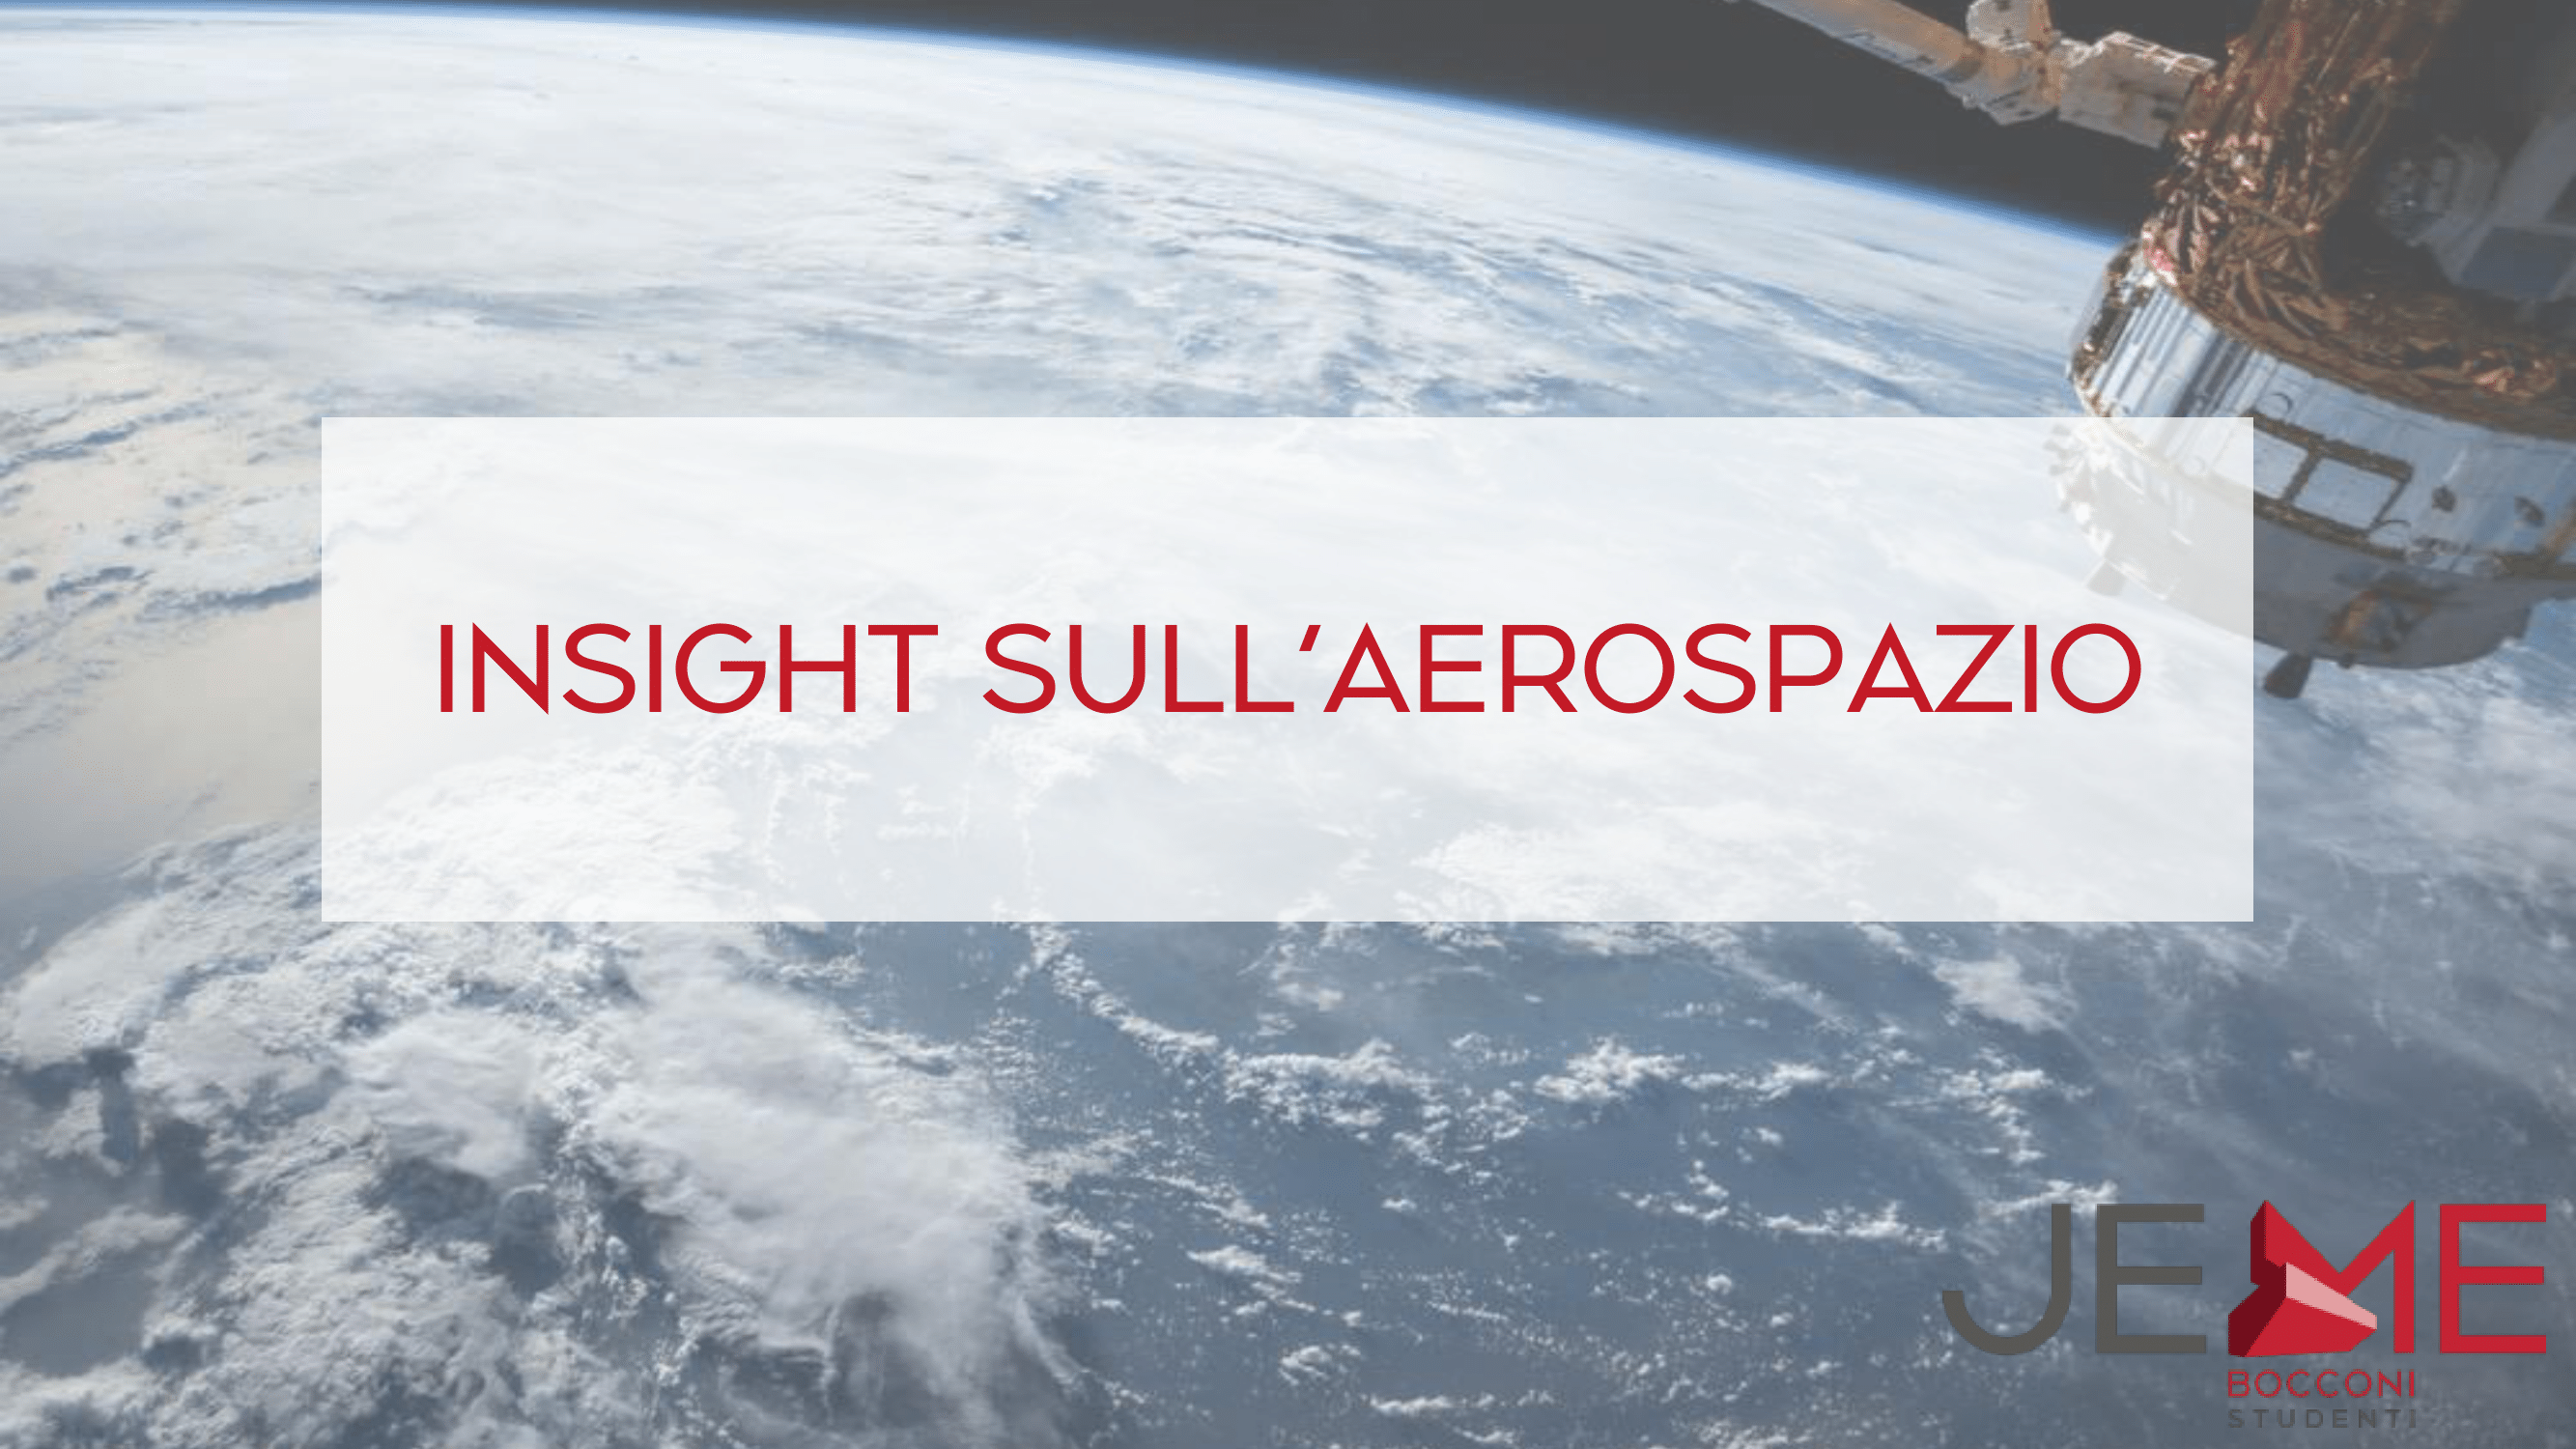 You are currently viewing Insight sulla Space Industry di JEME Bocconi Studenti